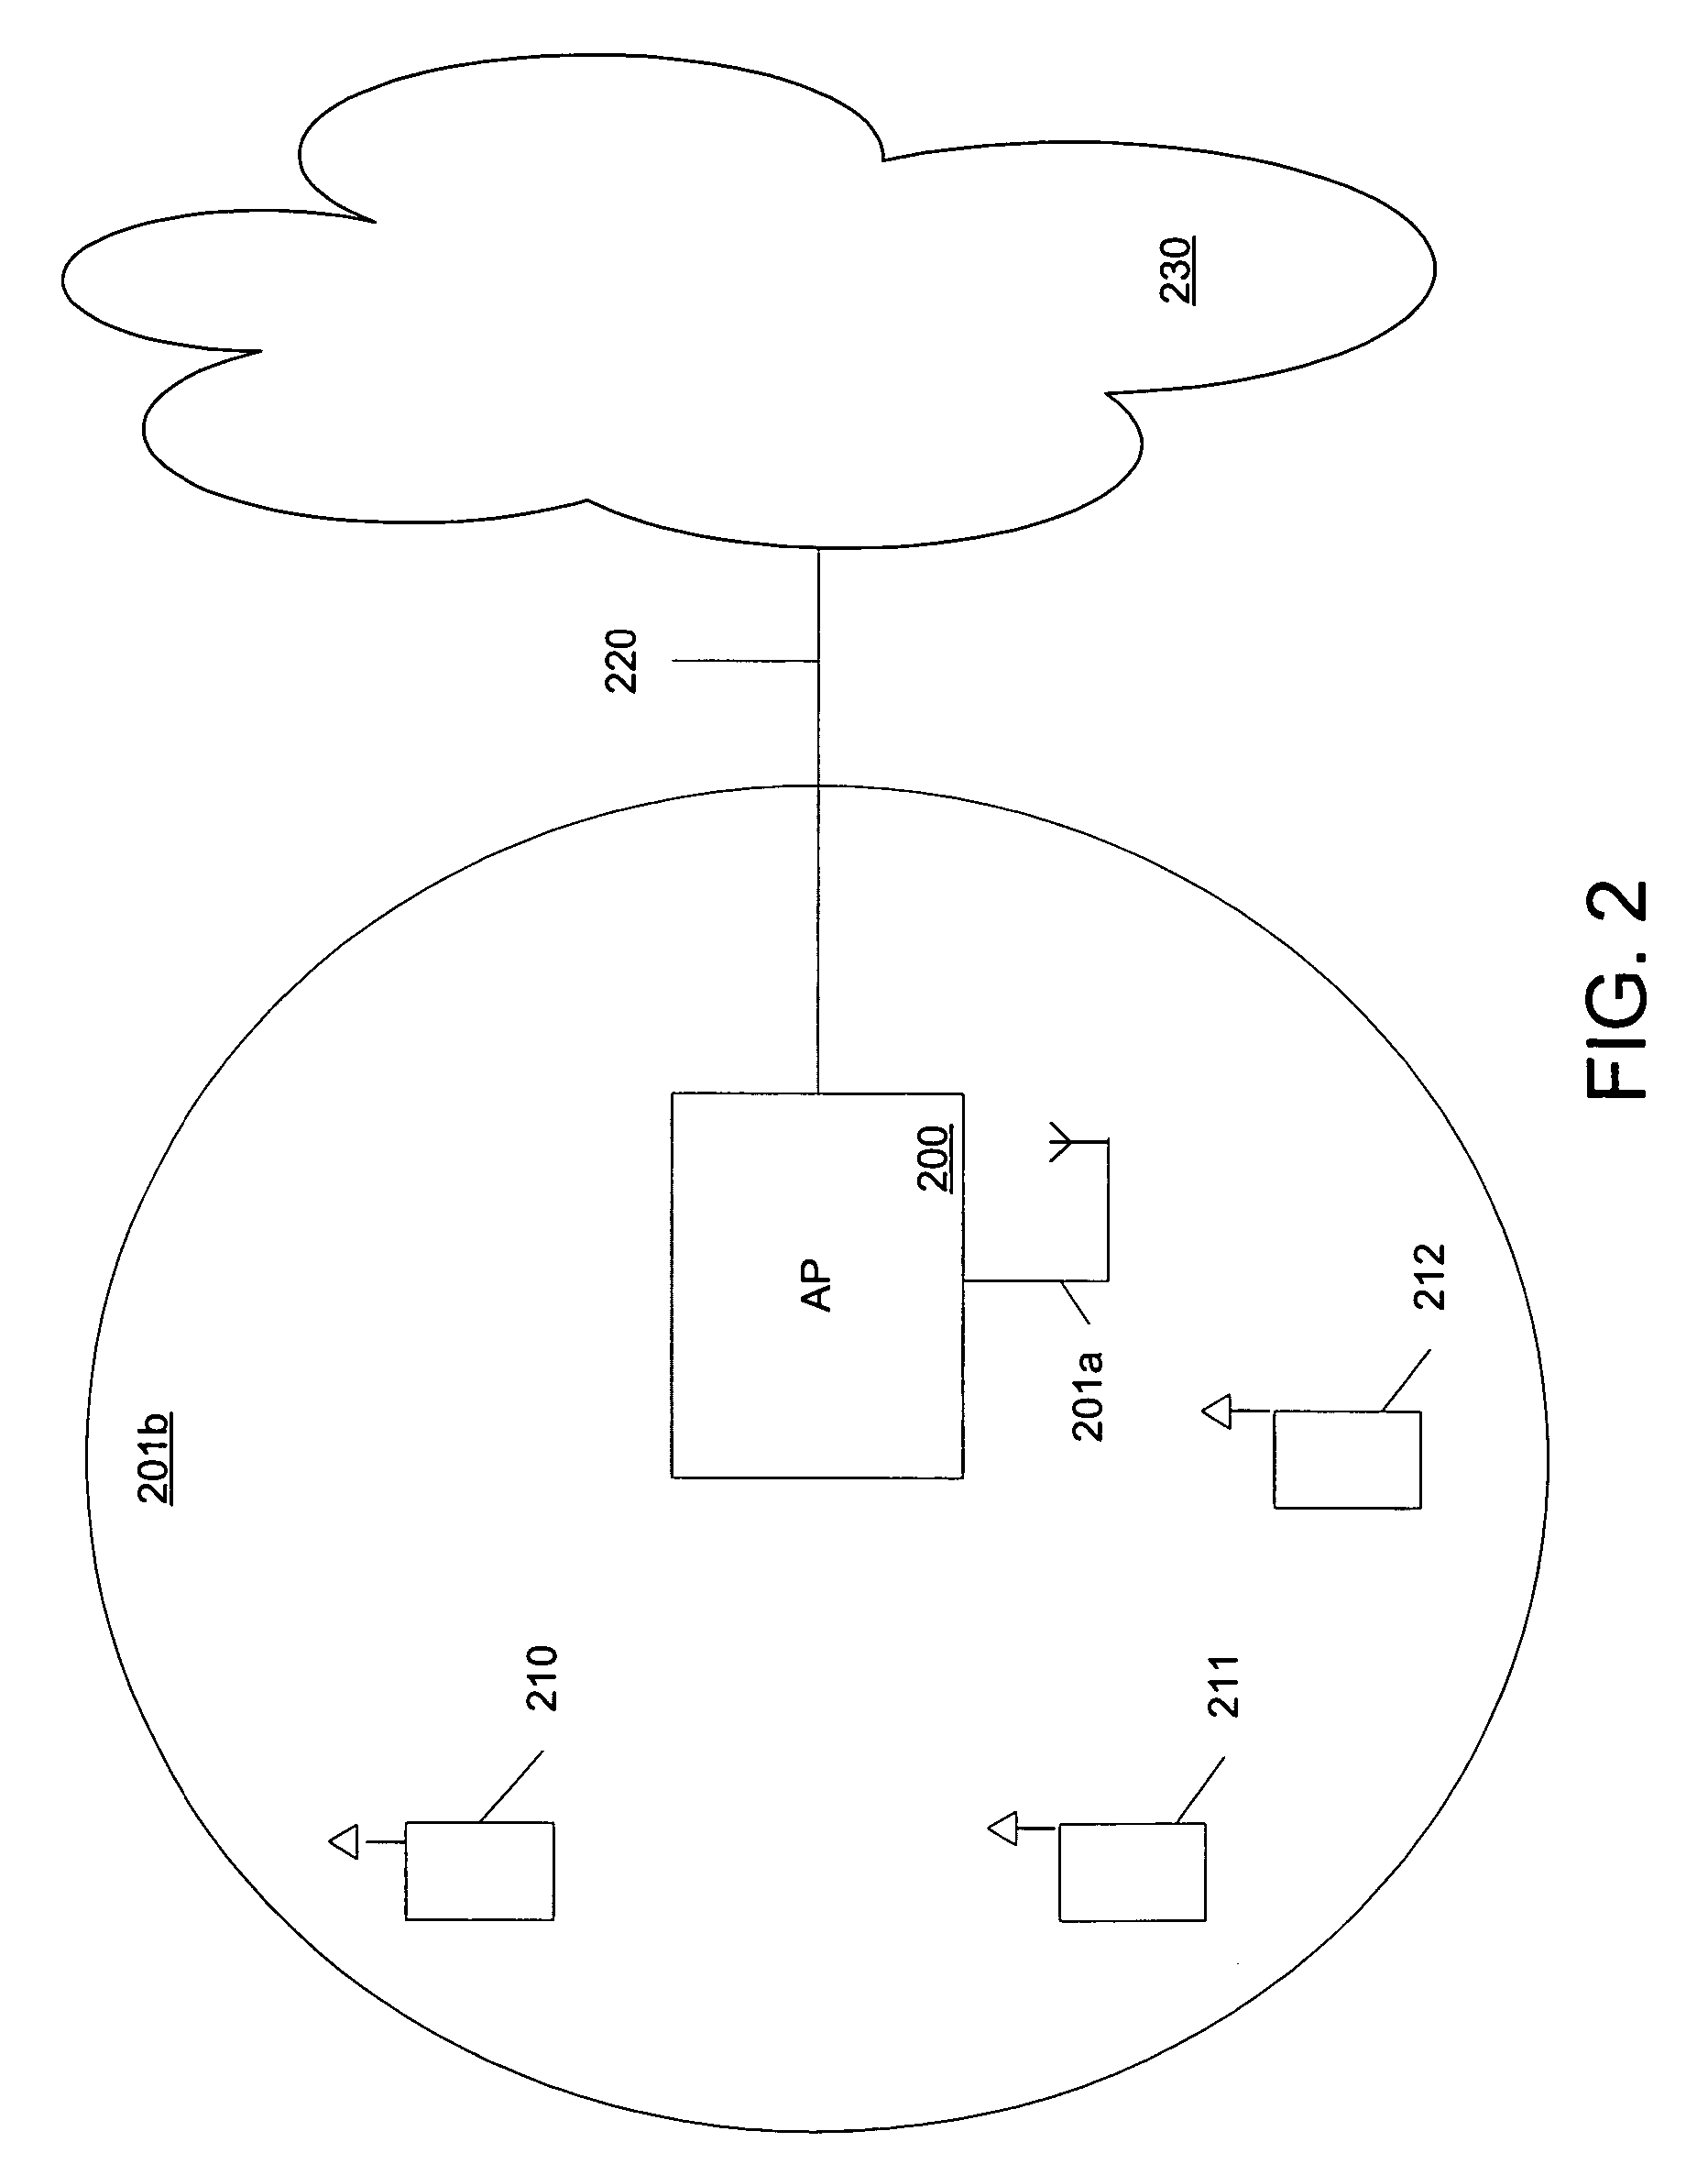 Method of creating incentives for using wireless hotspot locations